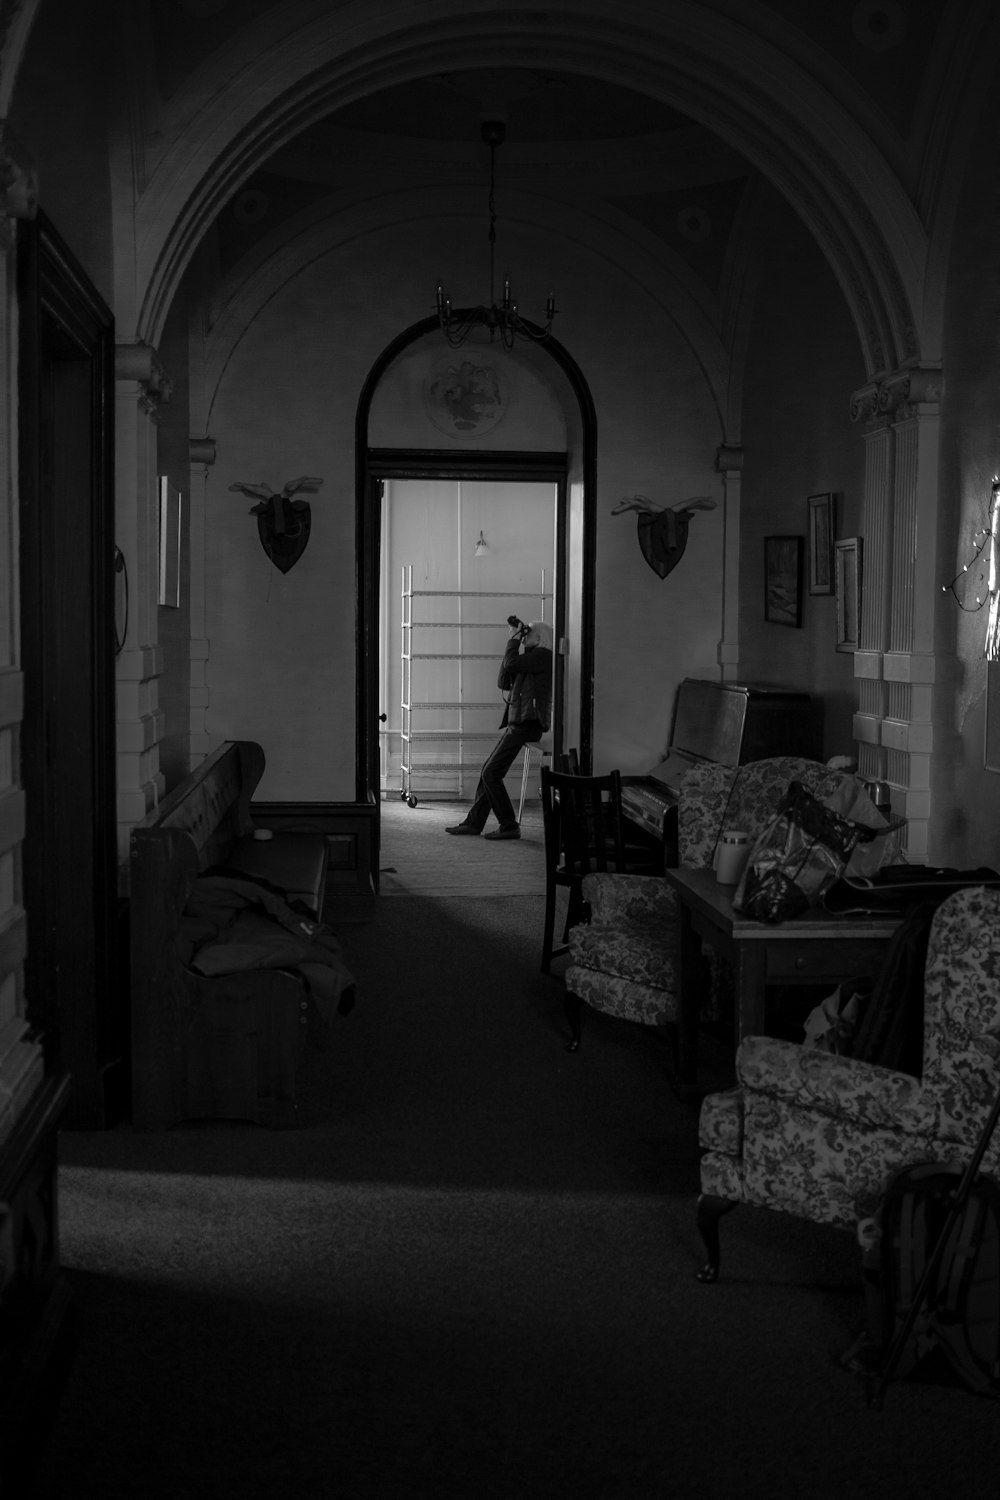 a black and white photo of a person walking into a room